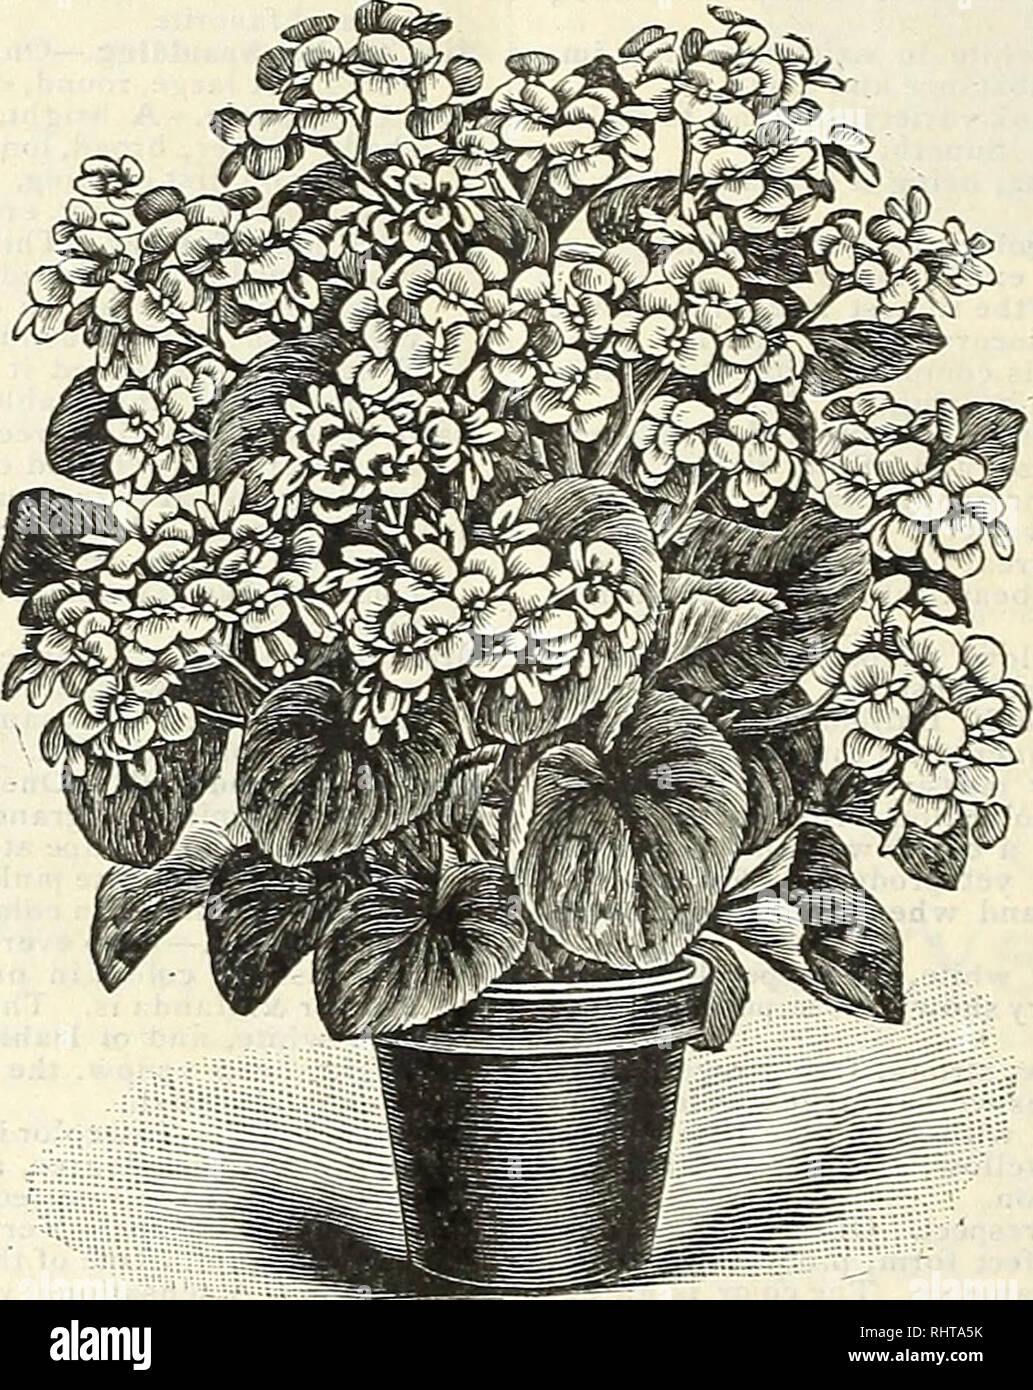 . Big bargain catalogue : Miss Ella V. Baines, the woman florist, Springfield, Ohio spring 1898. Seed industry and trade; Seeds; Flowers; Plants, Ornamental; Bulbs (Plants); Gardening. 12 Miss Ella V, Baines, The Woman Florist, Springfield, Ohio. 16T01 COLLECTION TOR $1.00 SIXTEEN ELEGANT BLOOMING PLANTS This collection of plants is selected so as to give a great variety of flowers, and at the same time give continuous bloom all the year. Say &quot;Sixteen to One&quot; Collection in ordering. Any eight plants in this collection for 50 cents; anv four for 25 cents. XXXXXXXX NEW HELIOTROPE, SAPP Stock Photo